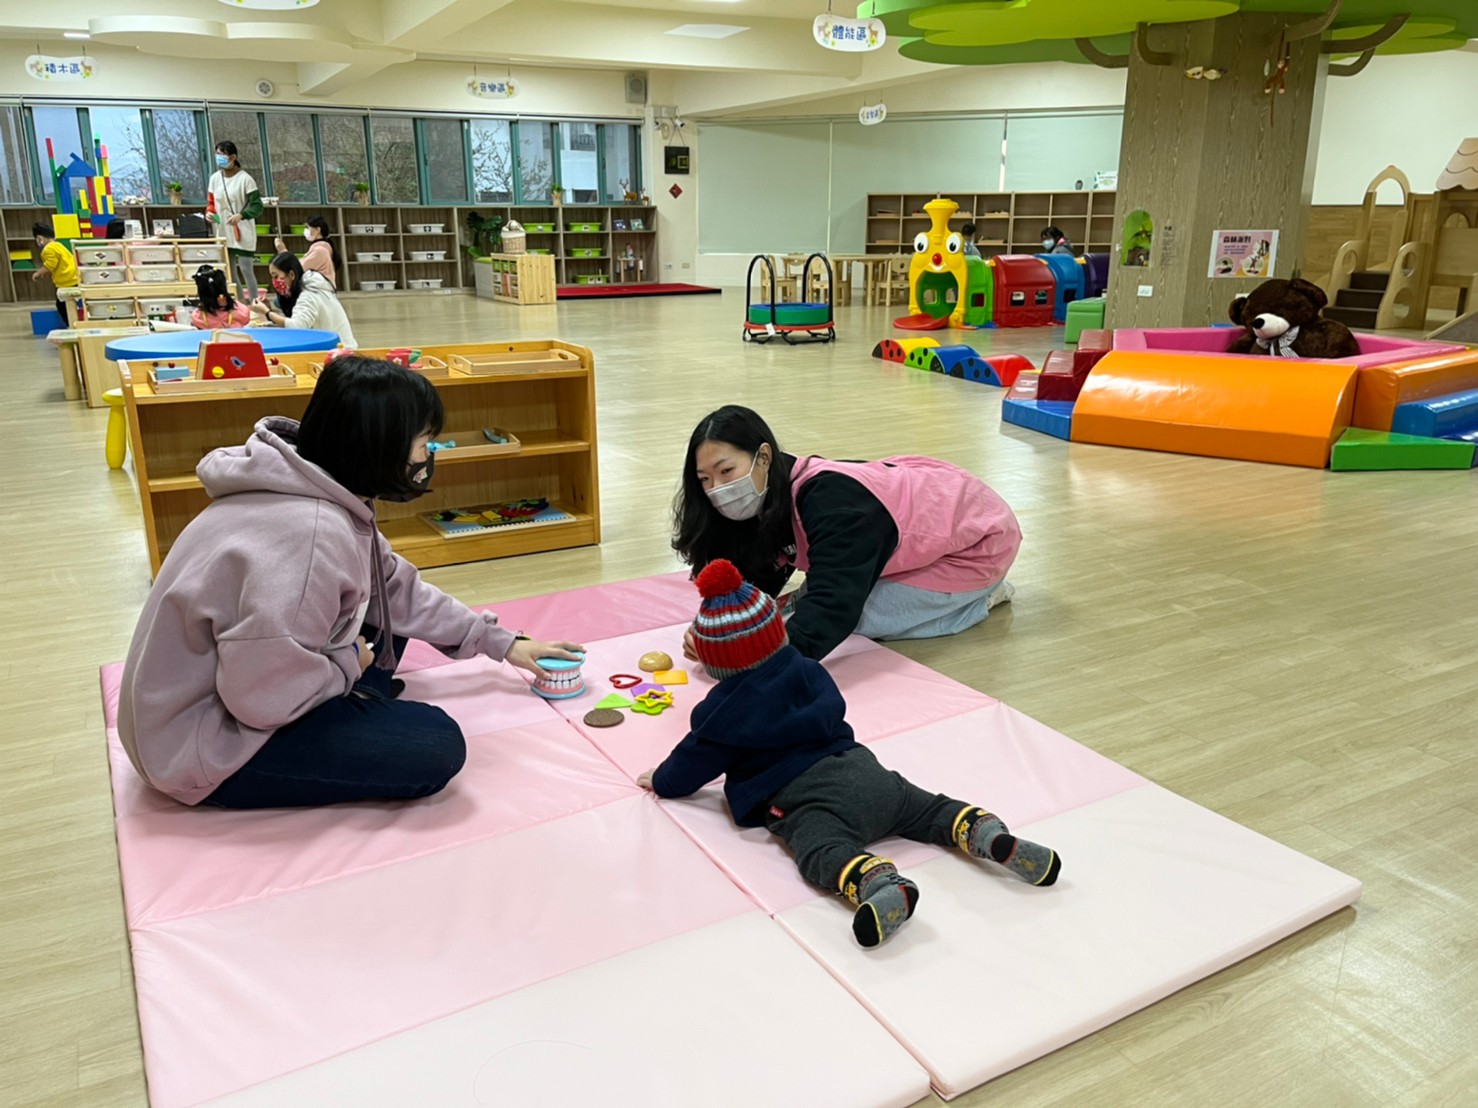 Gaming and learning zone – Specialists were guiding the parents and children to play together